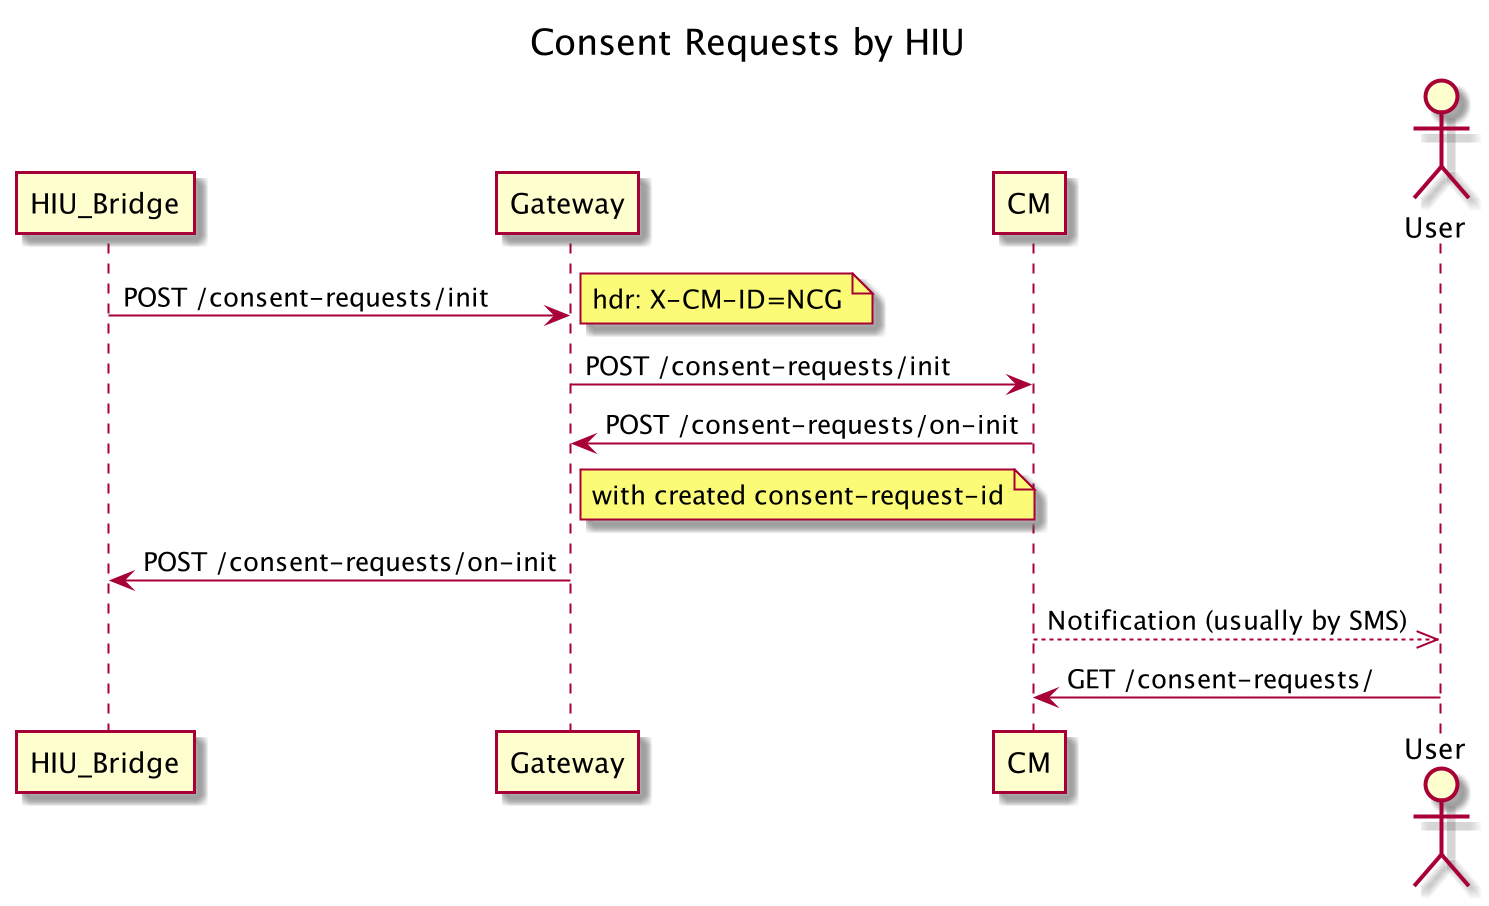 HIU requests Patient consent to view Information